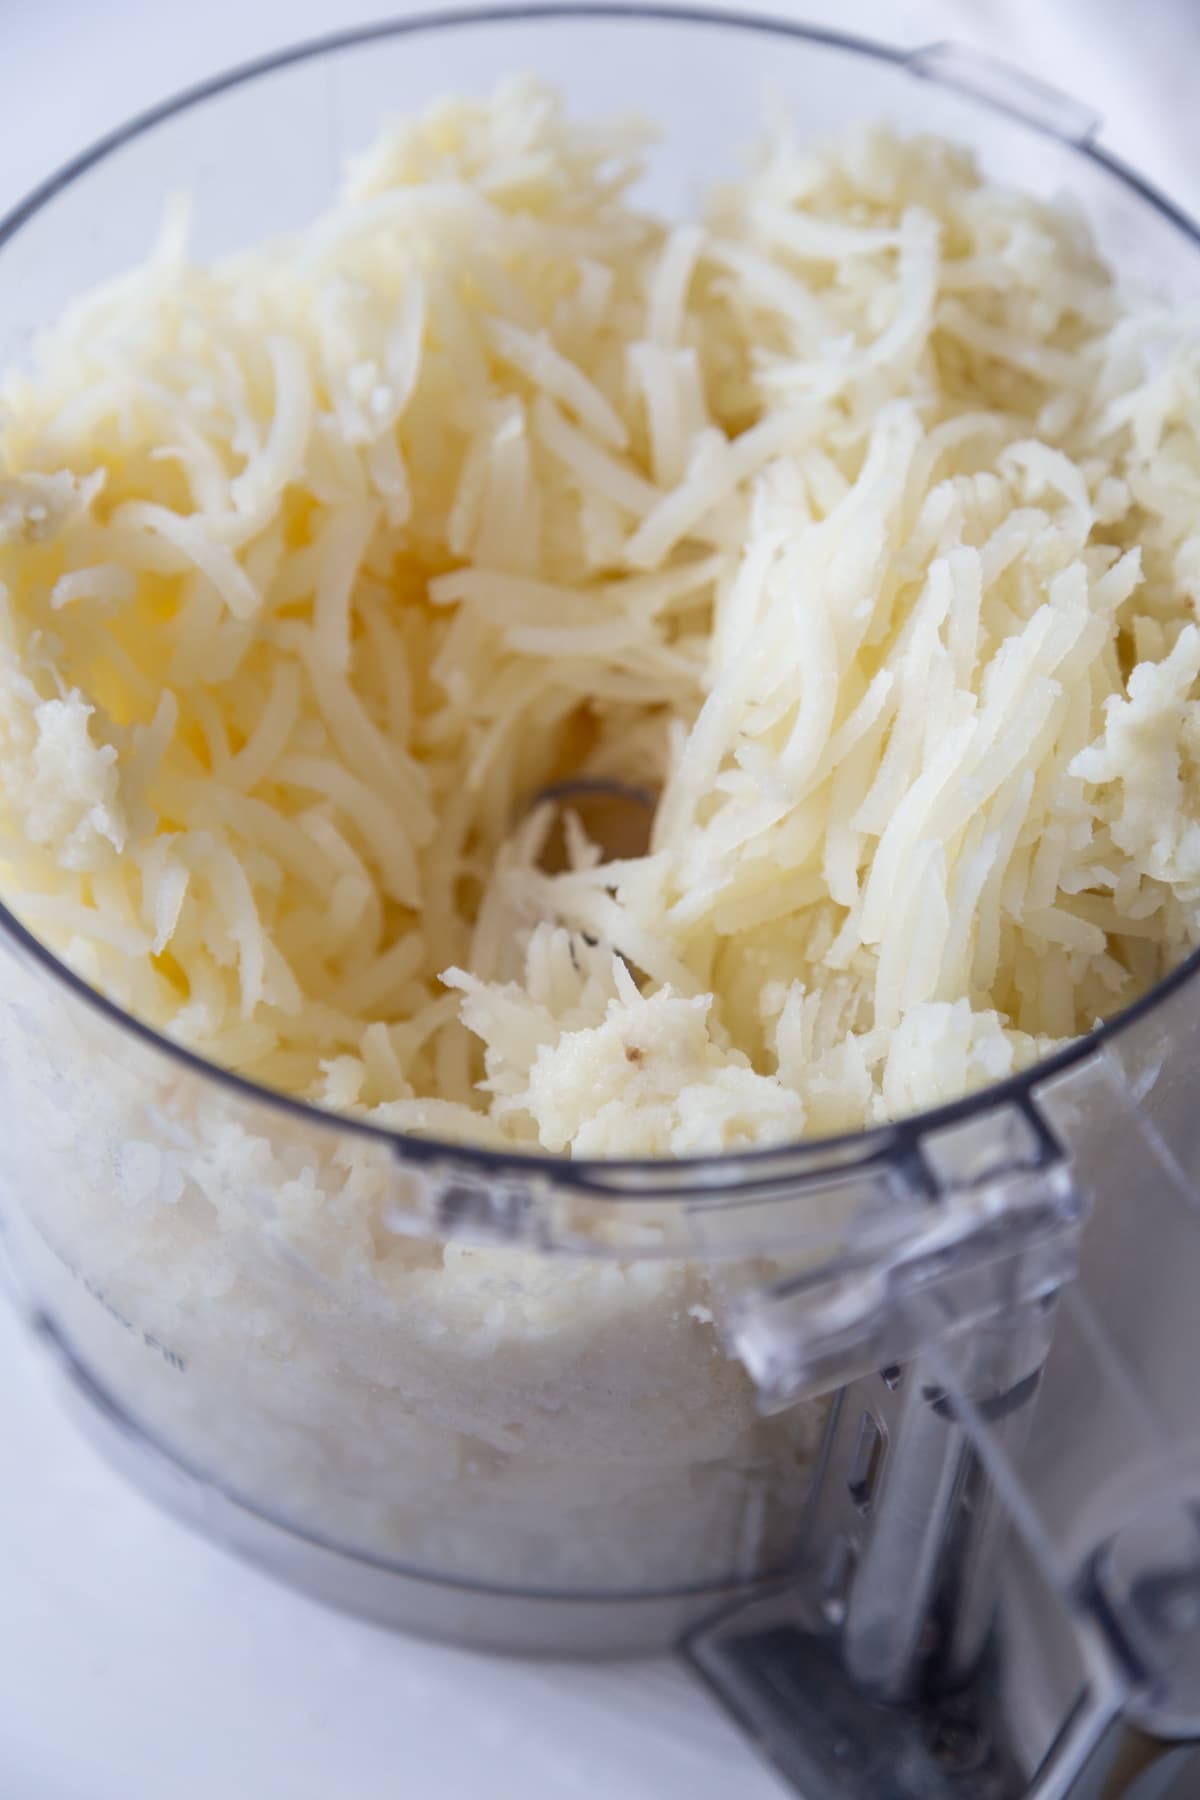 A food processor filled with shredded potato.